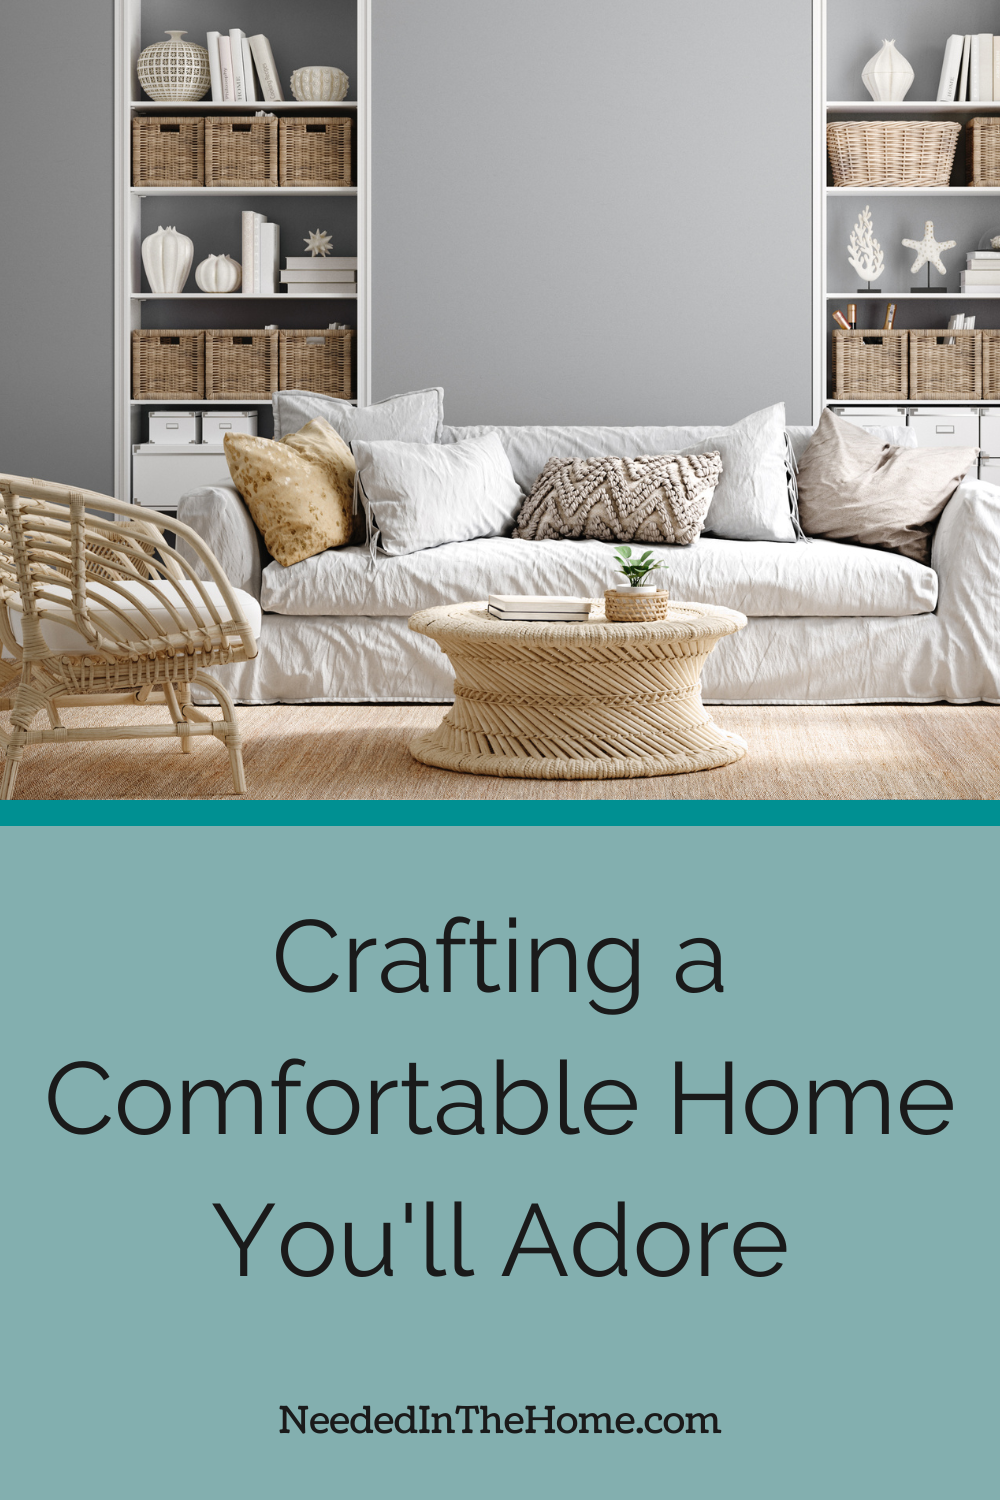 pinterest pin description crafting a comfortable home you'll adore cozy living room in neutral colors lots of pillow on couch neededinthehome